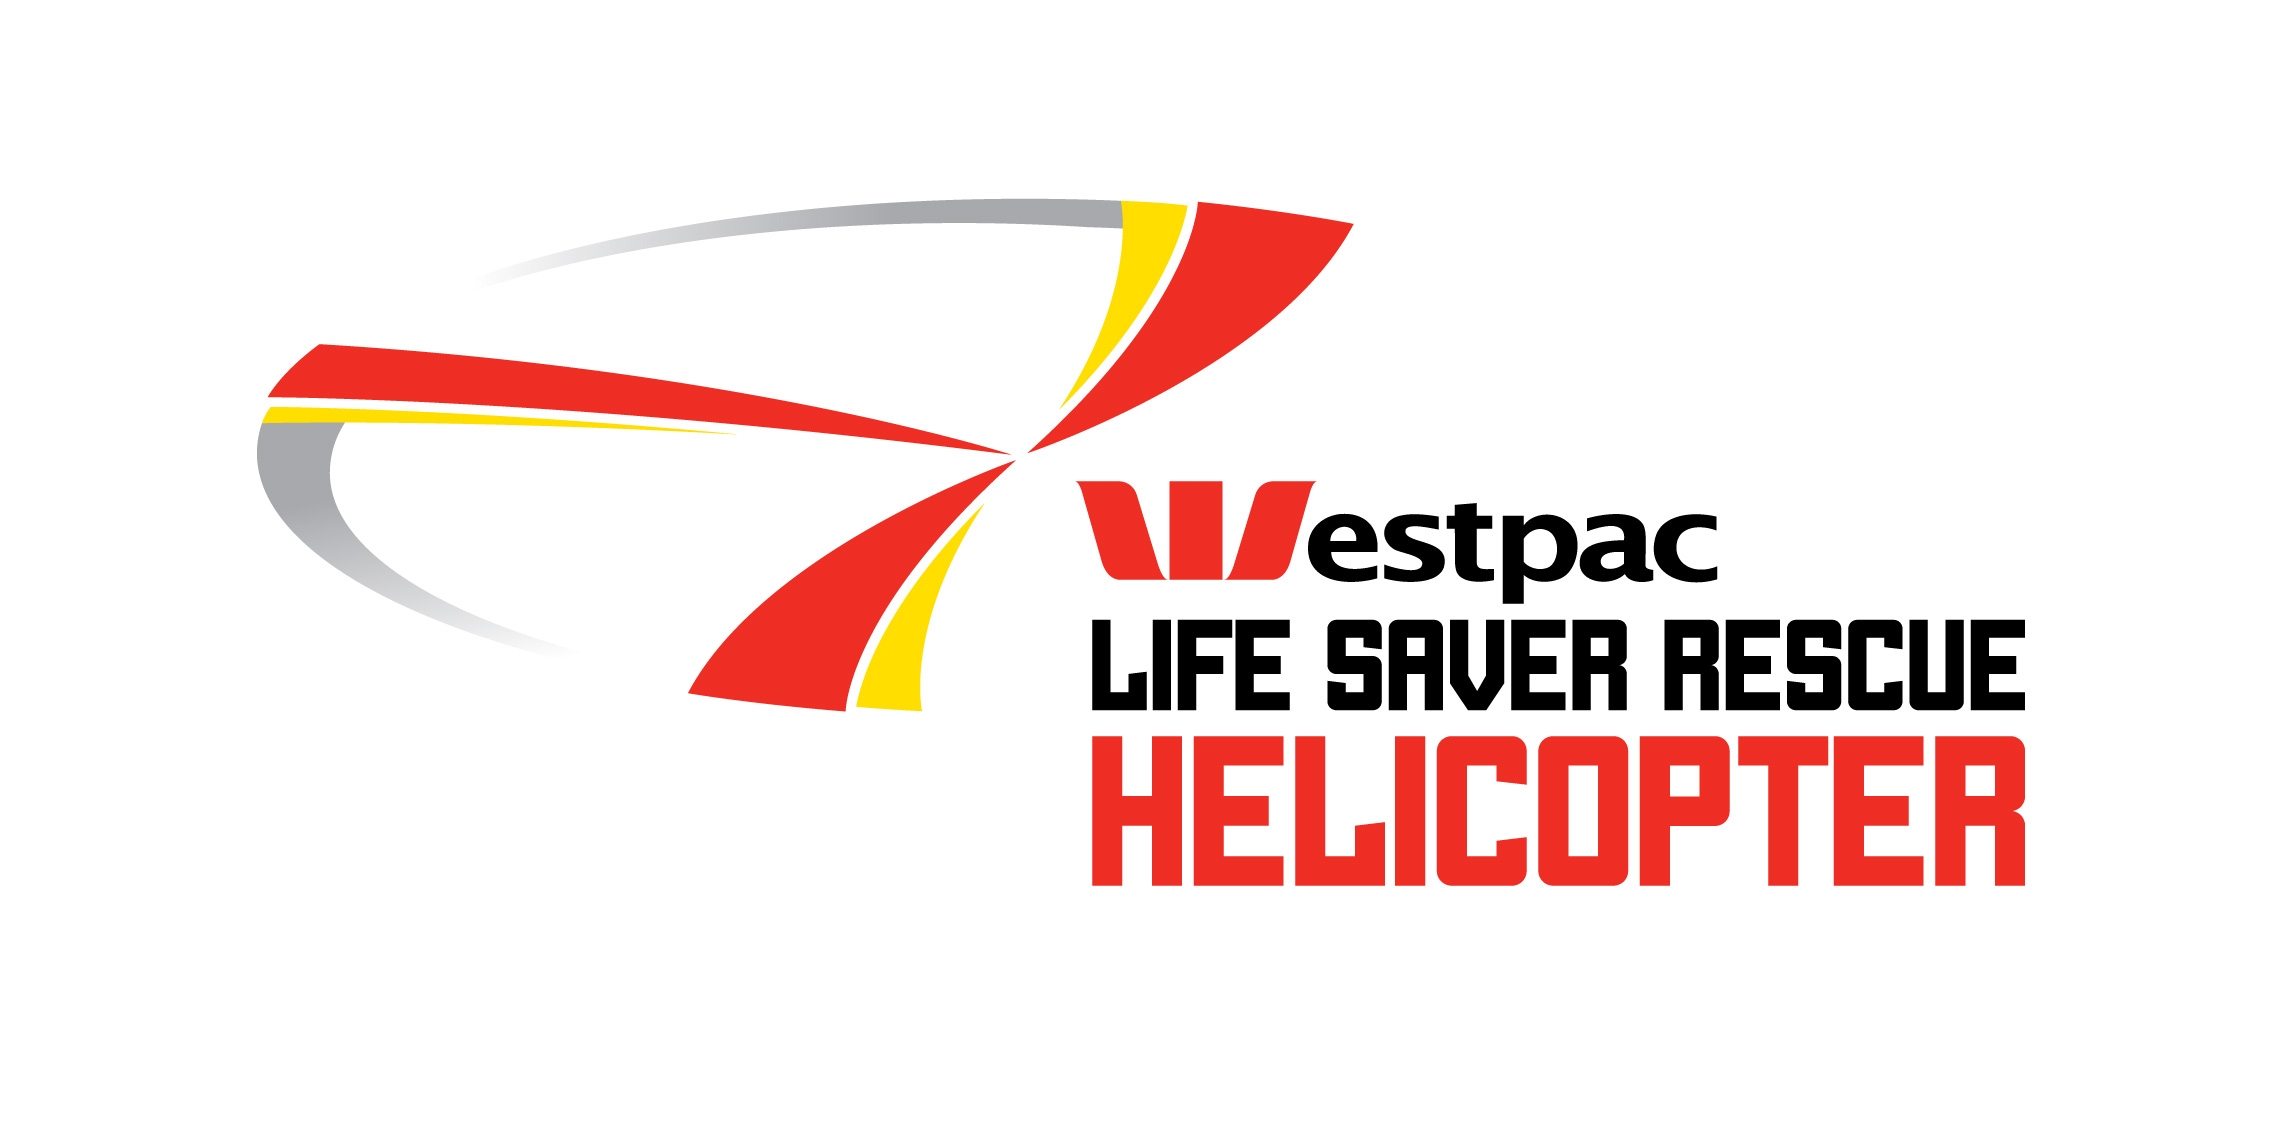 Westpac Life Saver Rescue Helicopter - Northern NSW logo